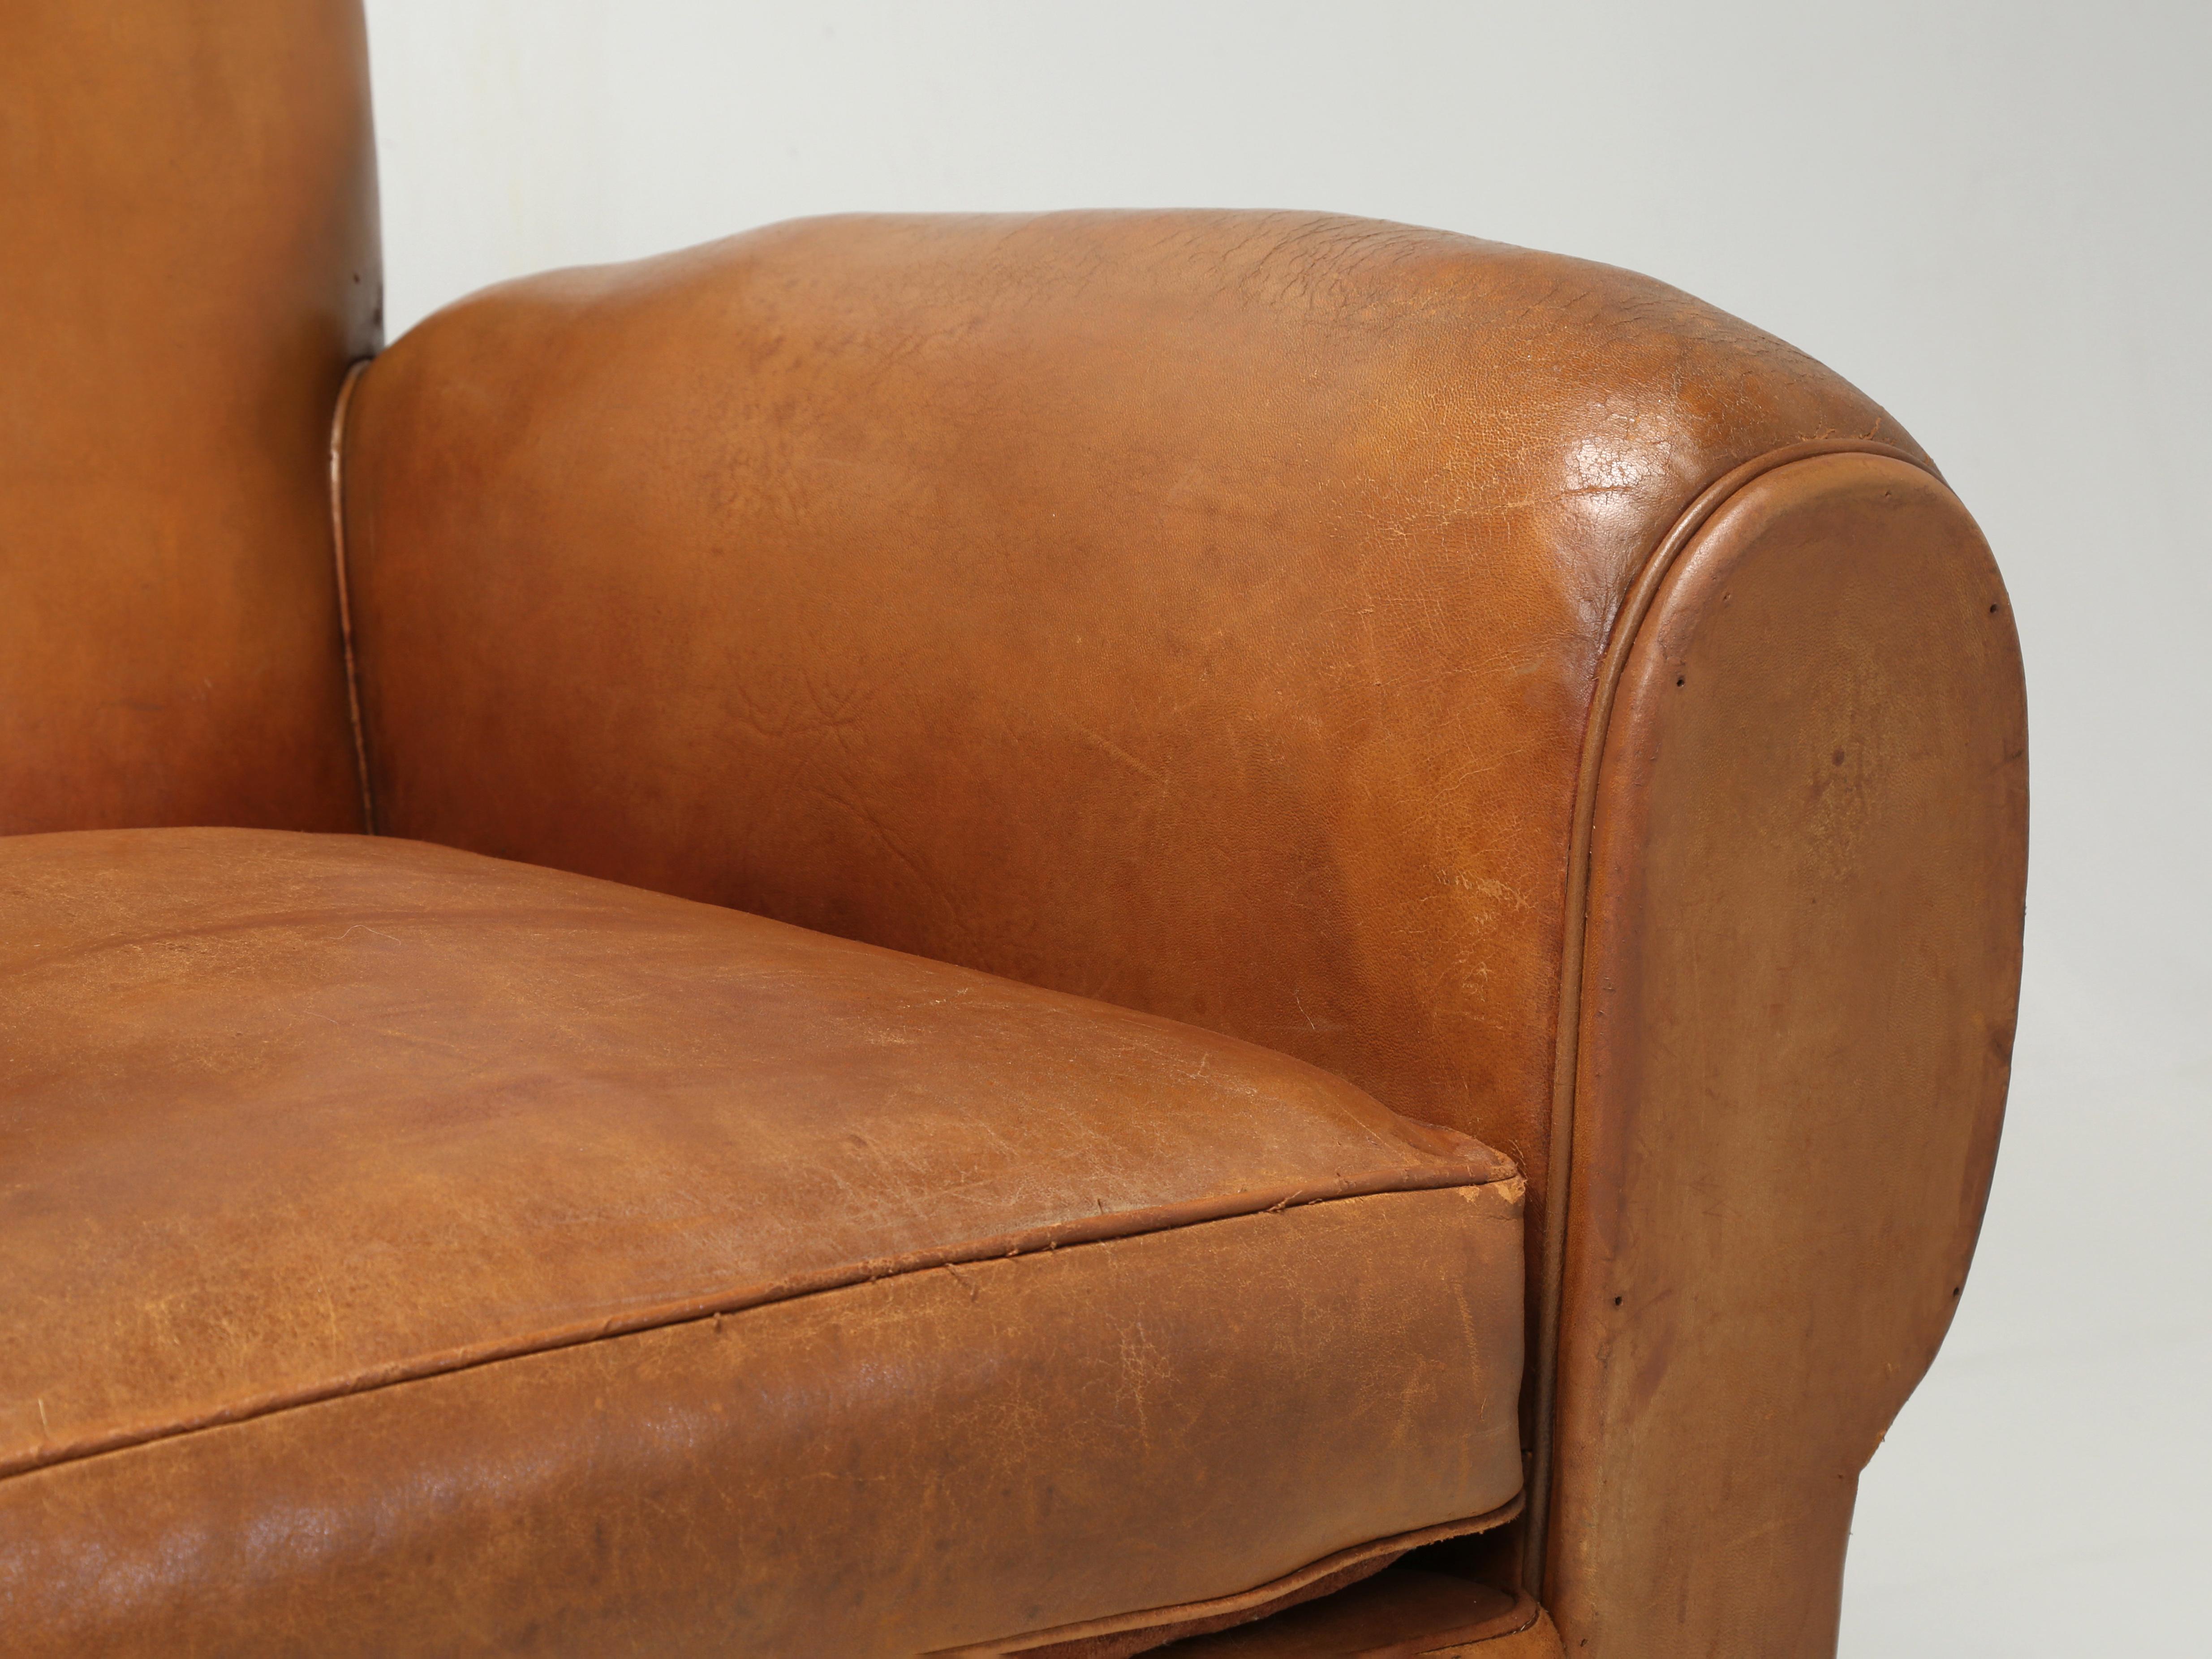 French Art Deco Moustache Original Leather Club Chairs Restored Inside, c1930s  7